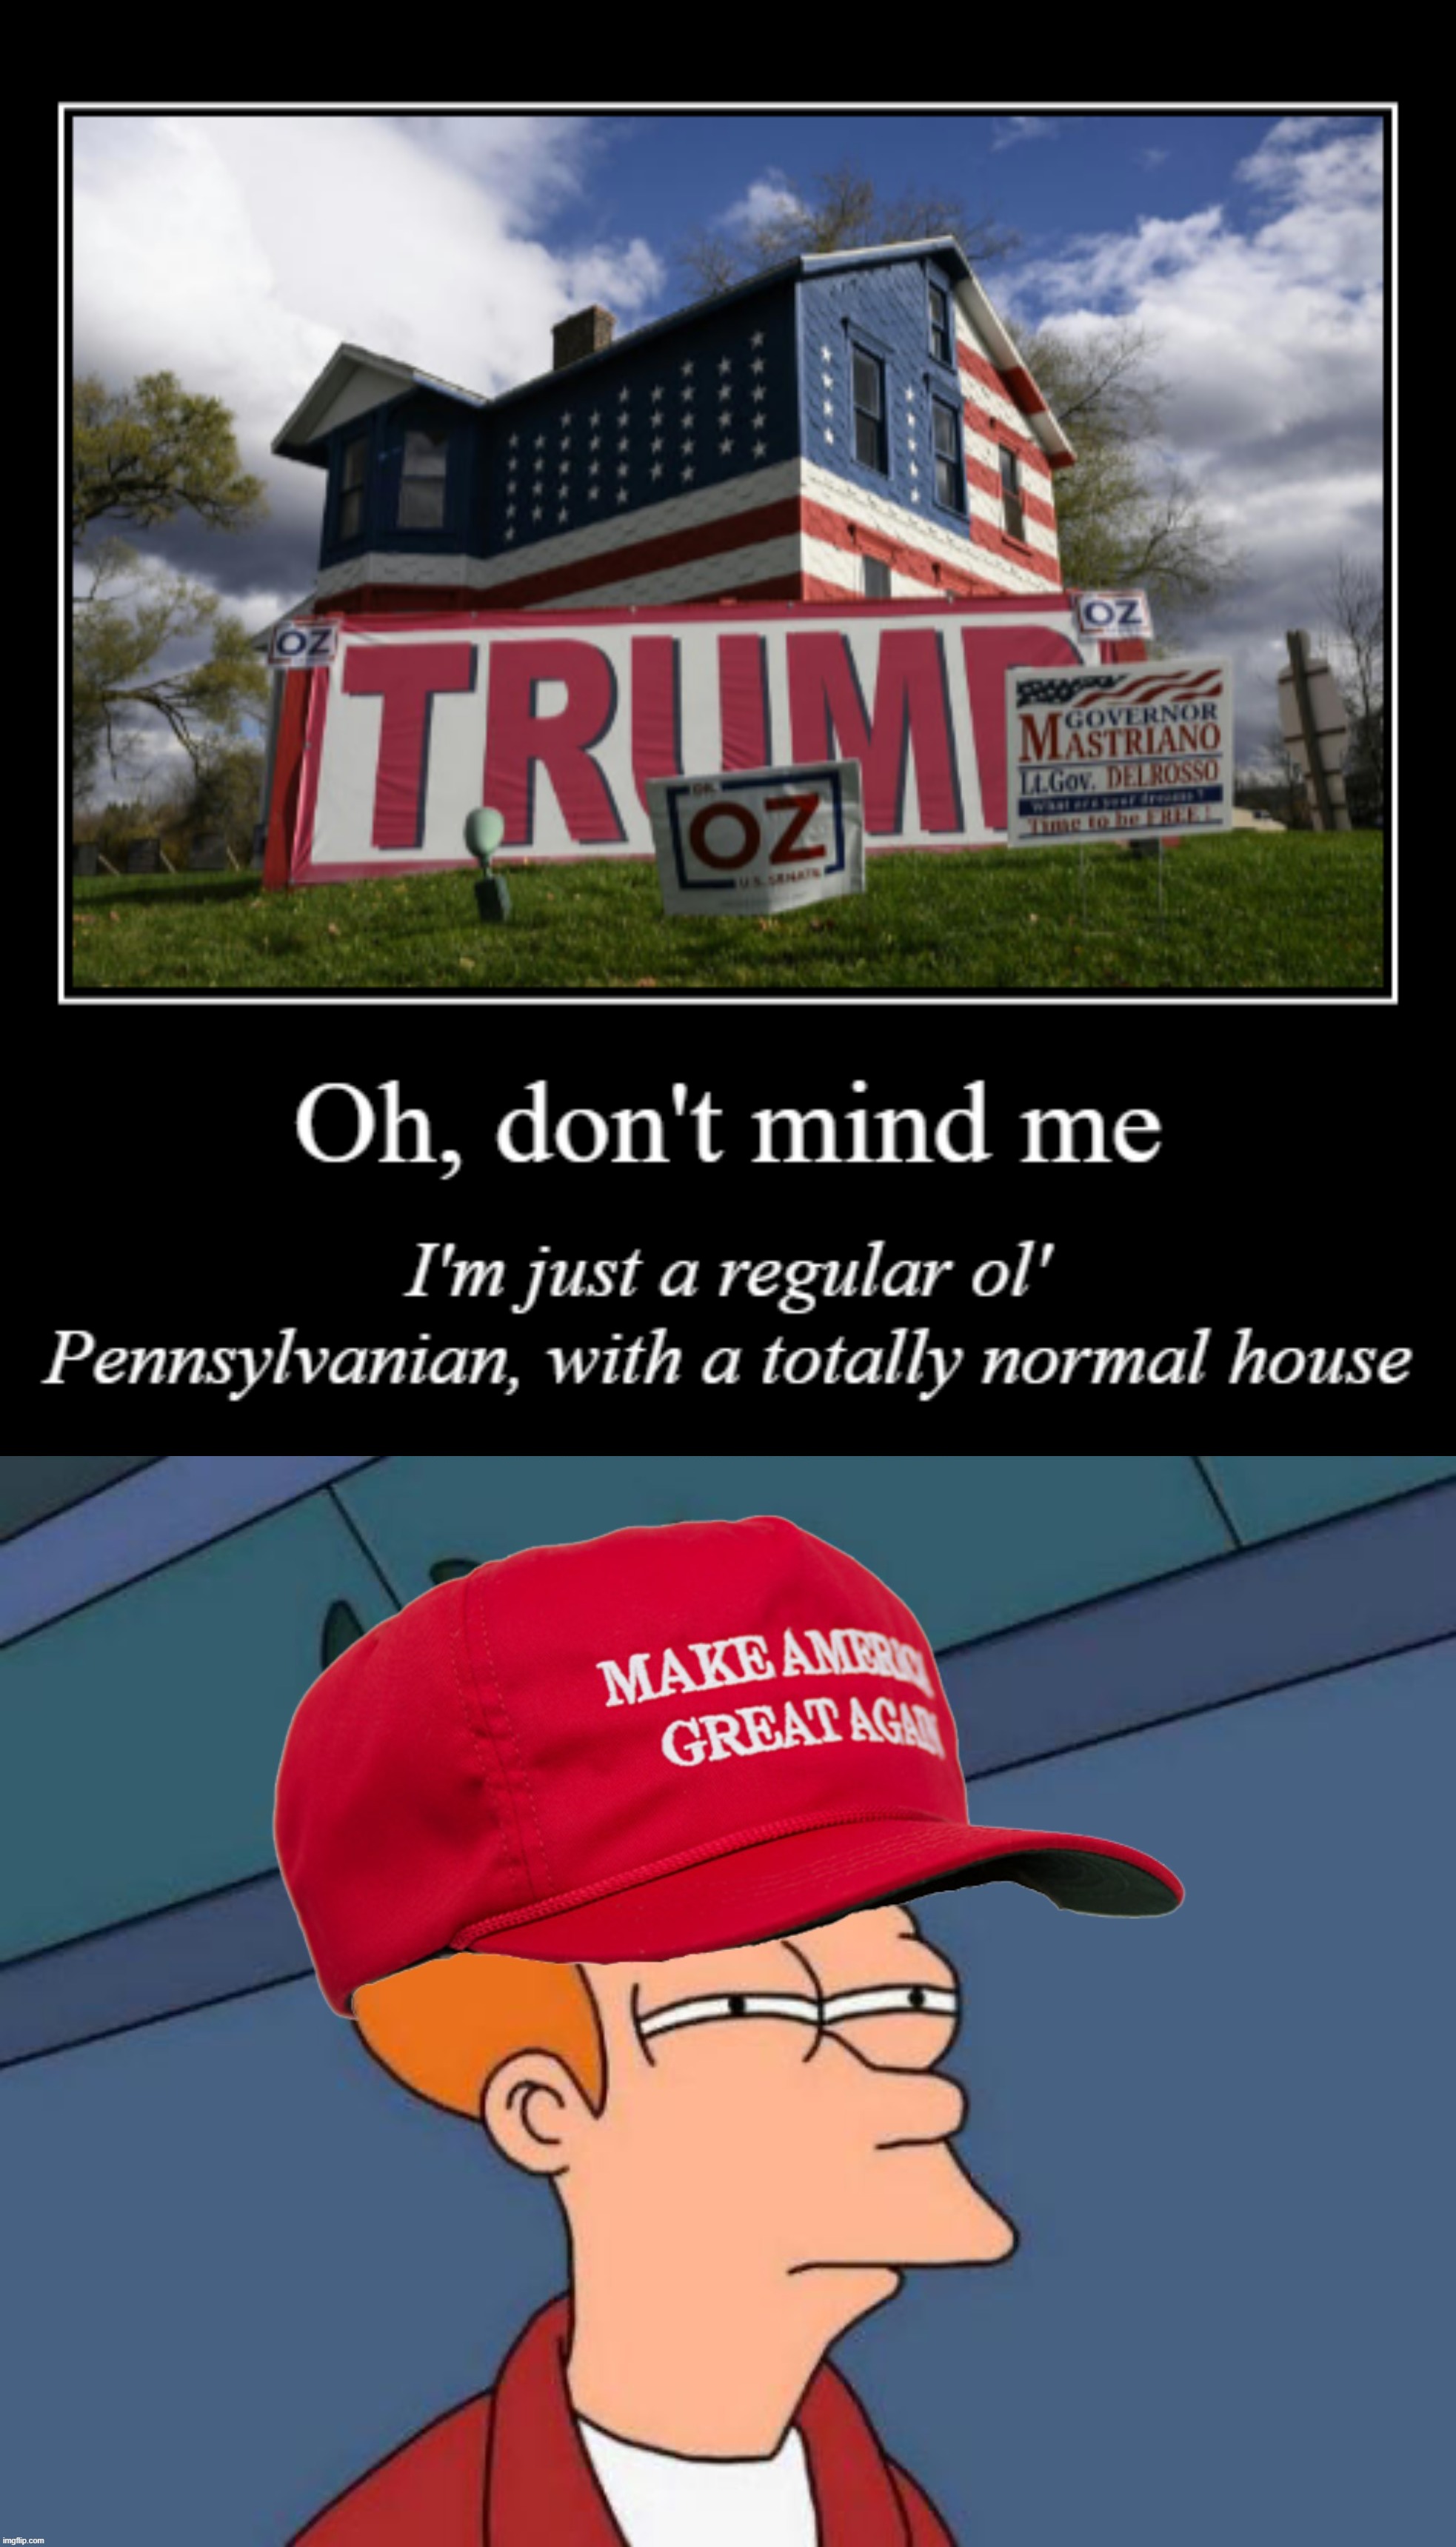 Not sure if I oughta go check on my neighbor or take off this hat and back away slowly | image tagged in trump cult house,maga futurama fry,maga,trump supporter,midterms,out-of-place futurama fry | made w/ Imgflip meme maker